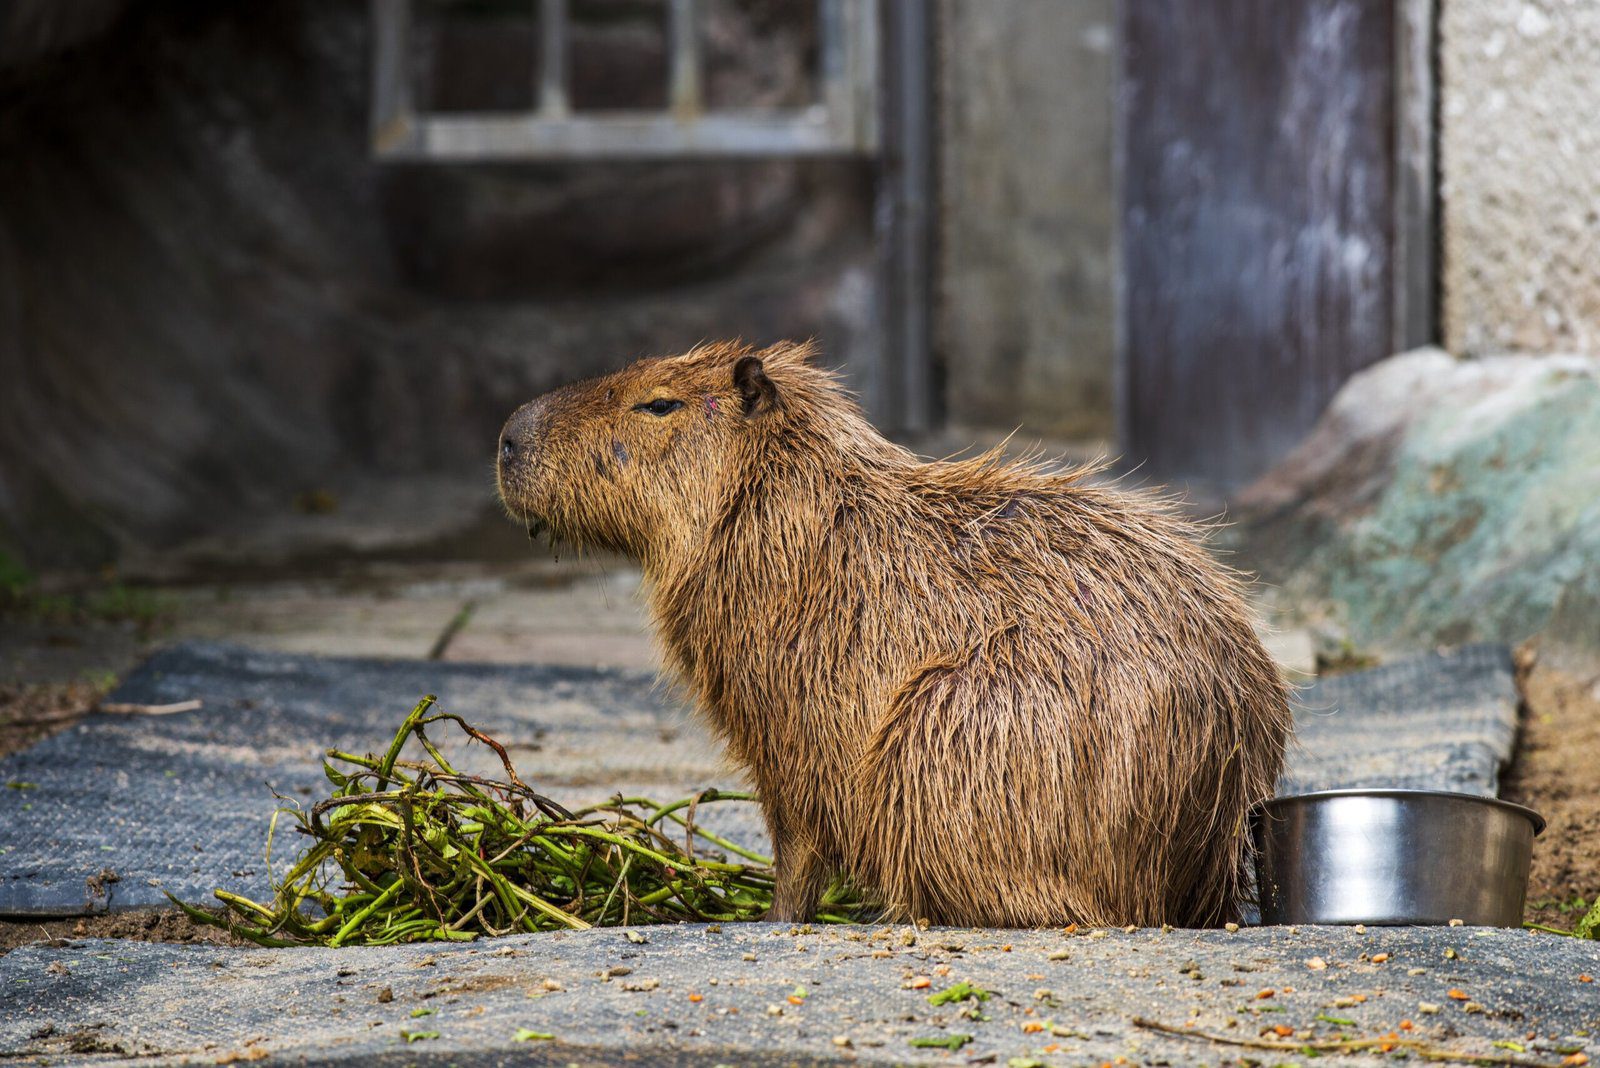 Sons of Anarchy: Rise of the Capybara